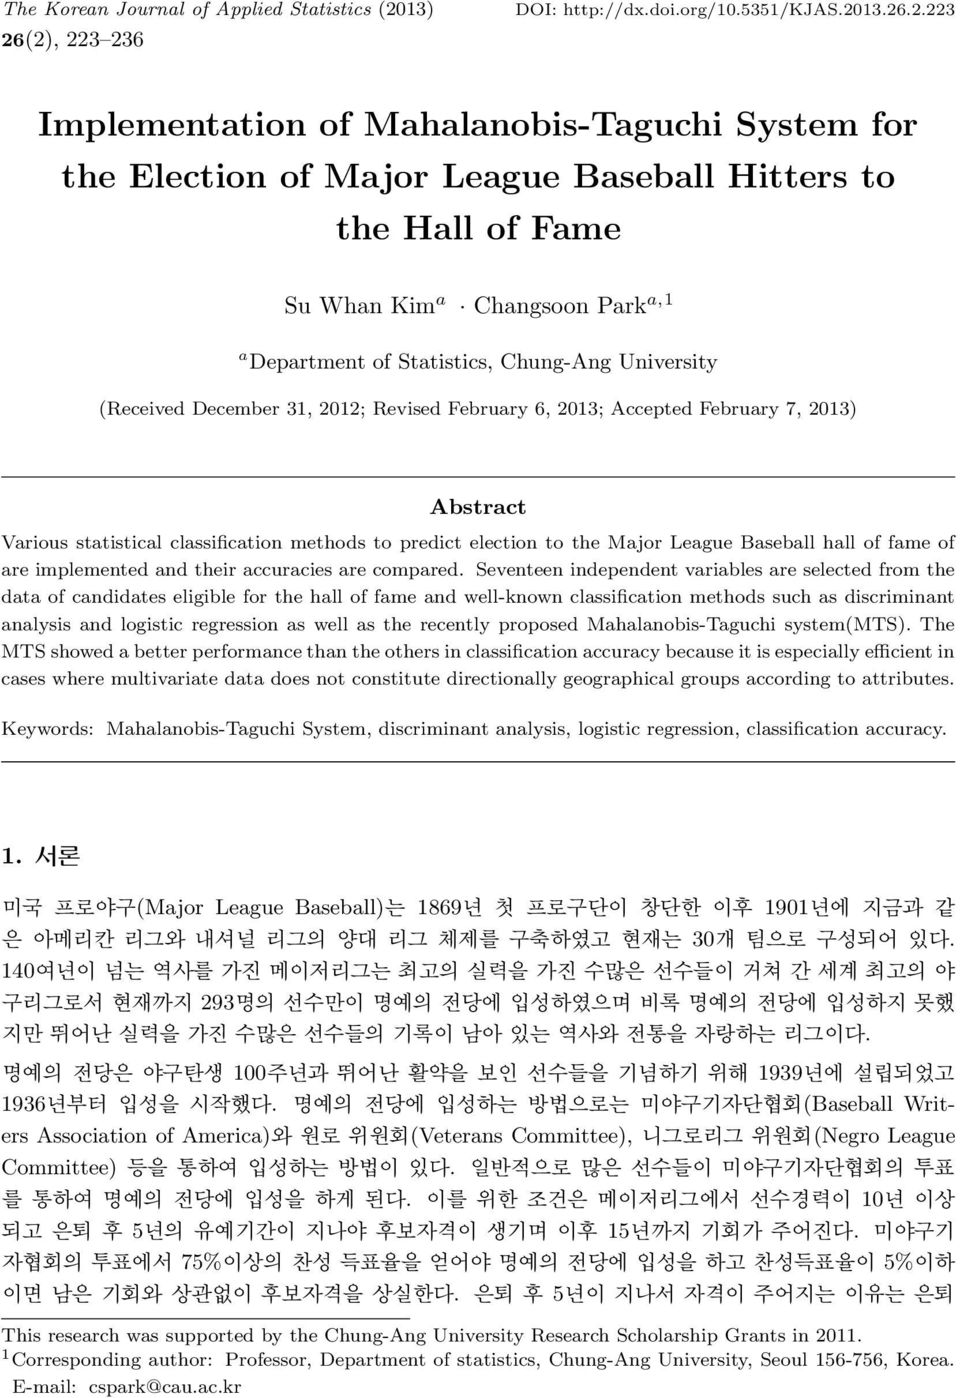 (2), 223 236 DOI: http://dx.doi.org/10.5351/kjas.2013.26.2.223 Implementation of Mahalanobis-Taguchi System for the Election of Major League Baseball Hitters to the Hall of Fame Su Whan Kim a